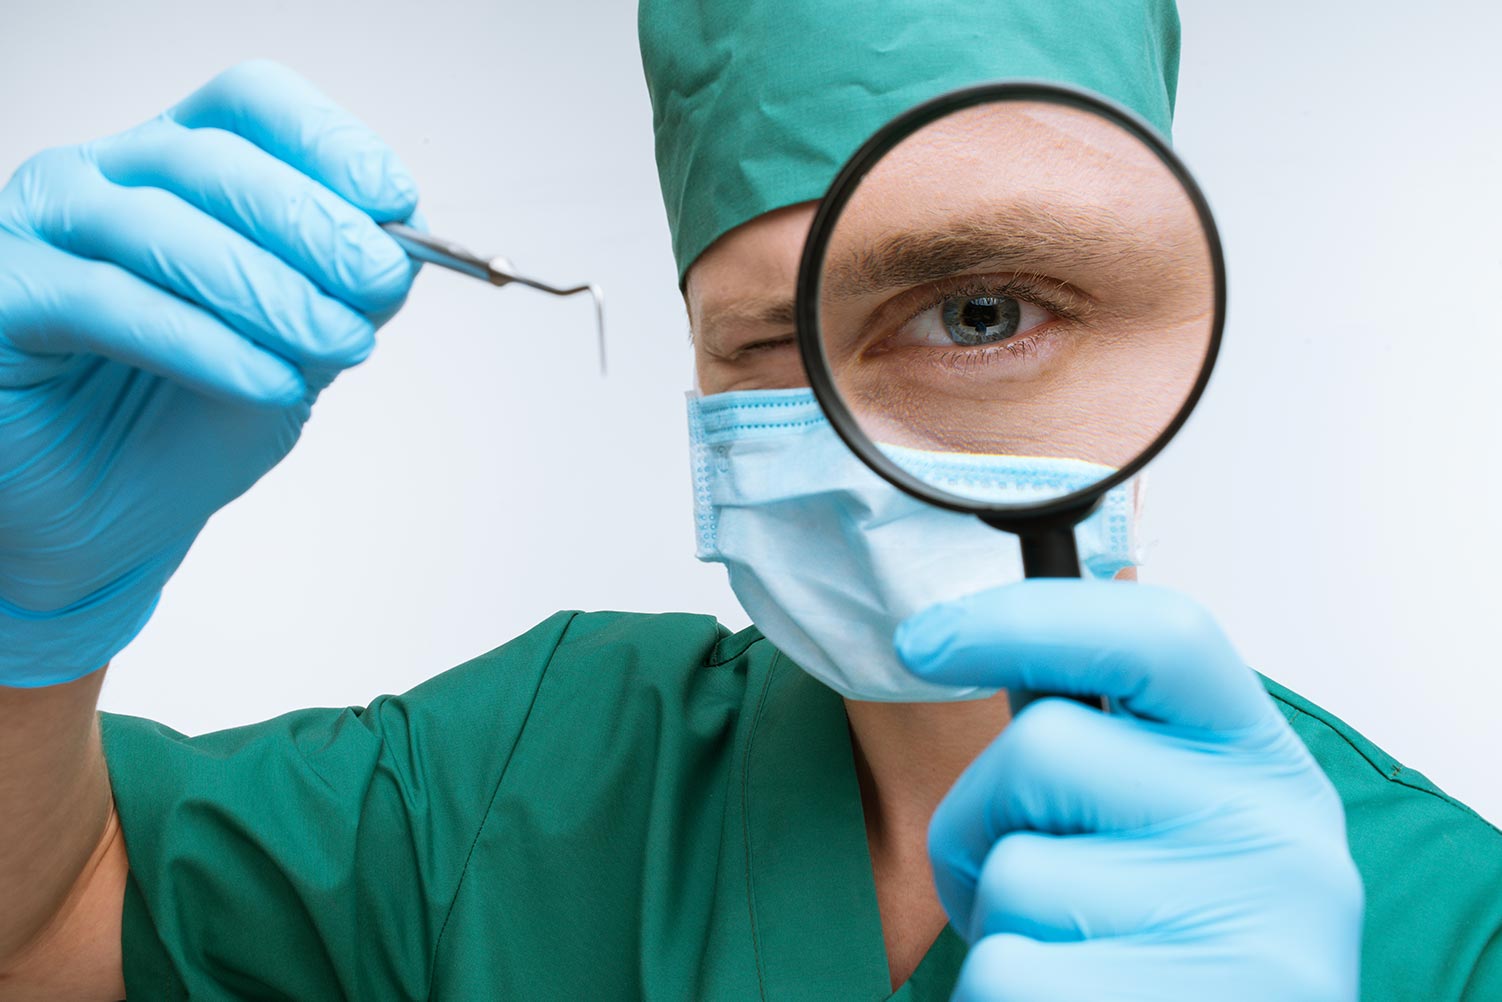 Dental magnifying glasses: What should you consider when choosing